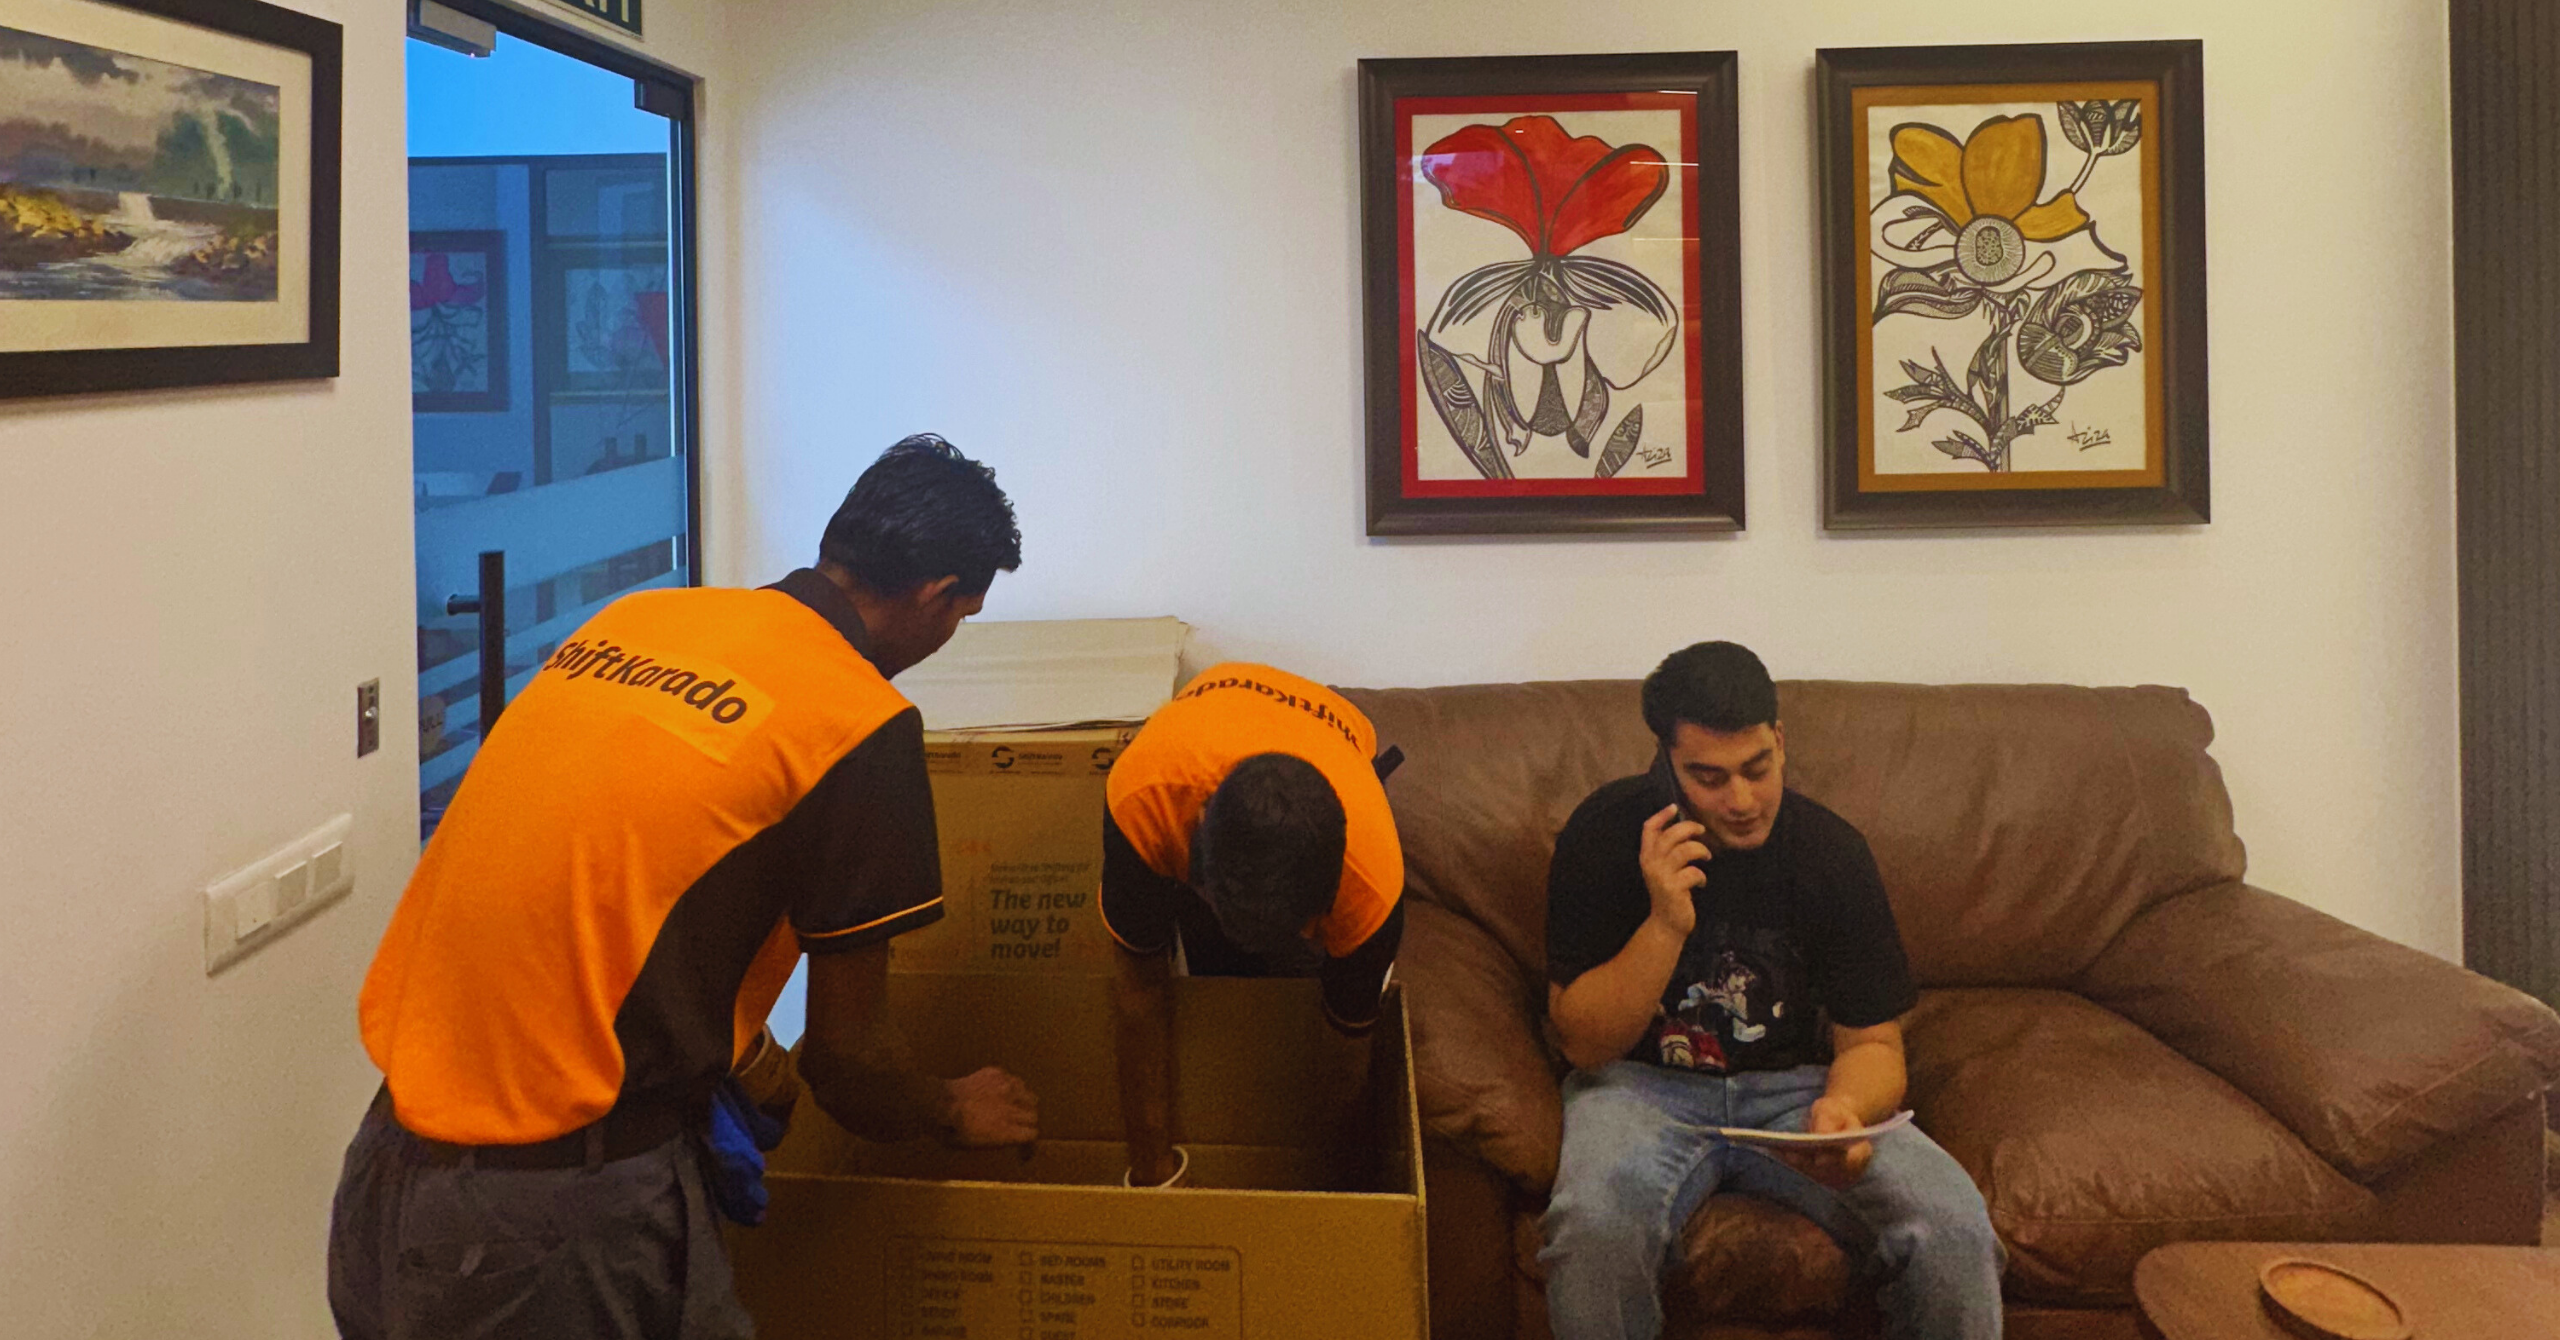 Hiring the best packers and movers in Noida is a worthy investment for a stress-free and efficient move. Their professionalism, use of high-quality packaging materials, real-time tracking, and excellent customer support make the relocation process smooth and secure. With their expertise, you can focus on settling into your new home without worrying about the logistics of the move.